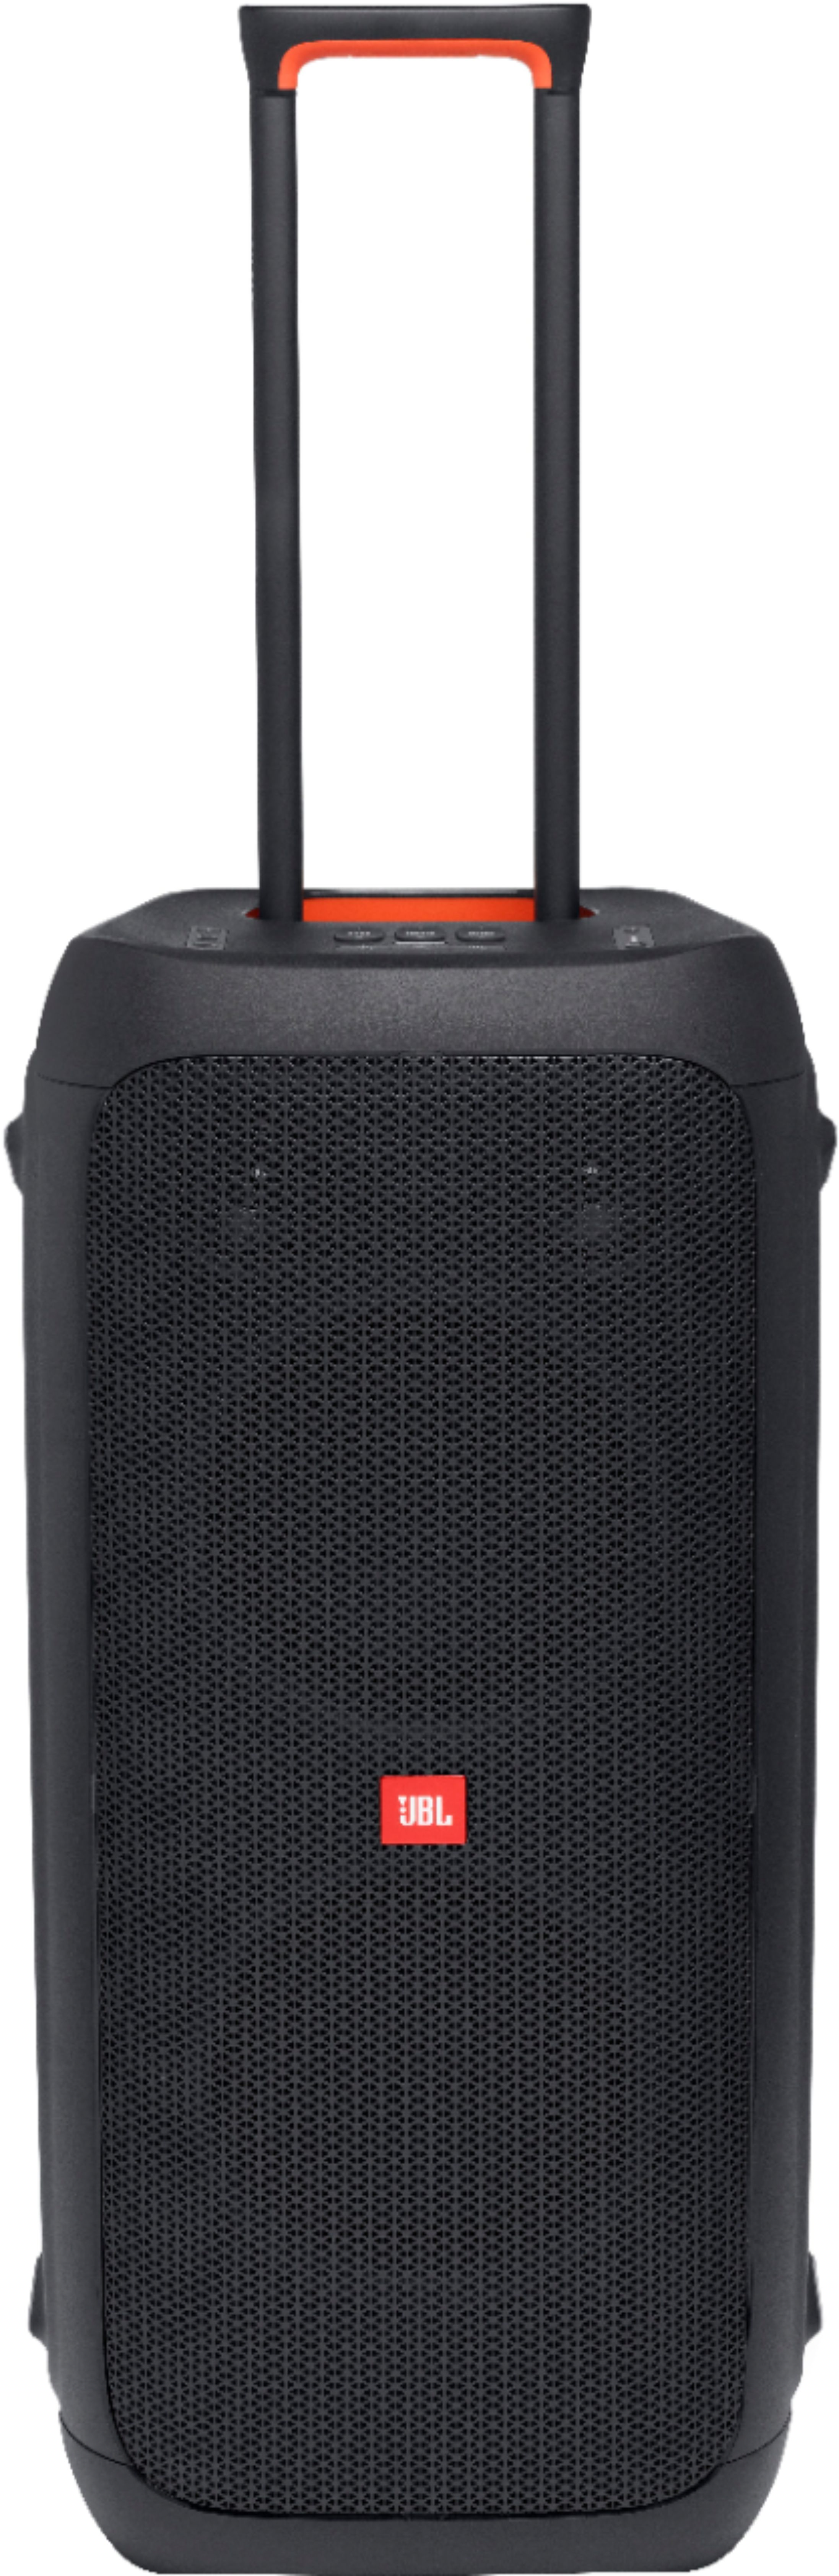 JBL Partybox 310 Portable Bluetooth Party Speaker